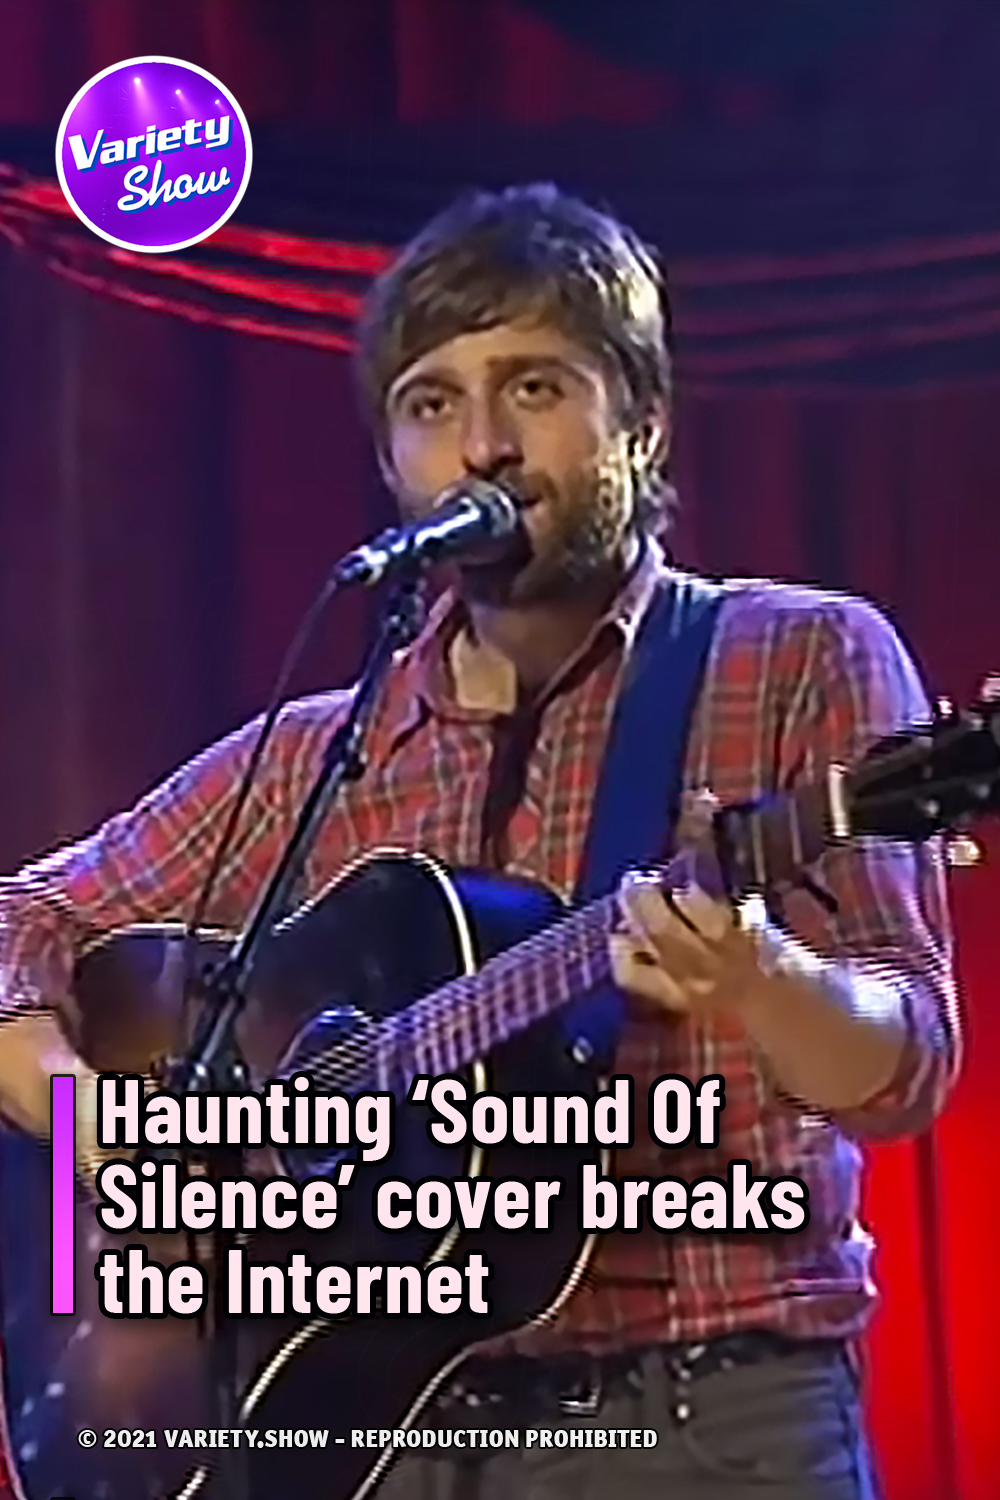 Haunting ‘Sound Of Silence’ cover breaks the Internet